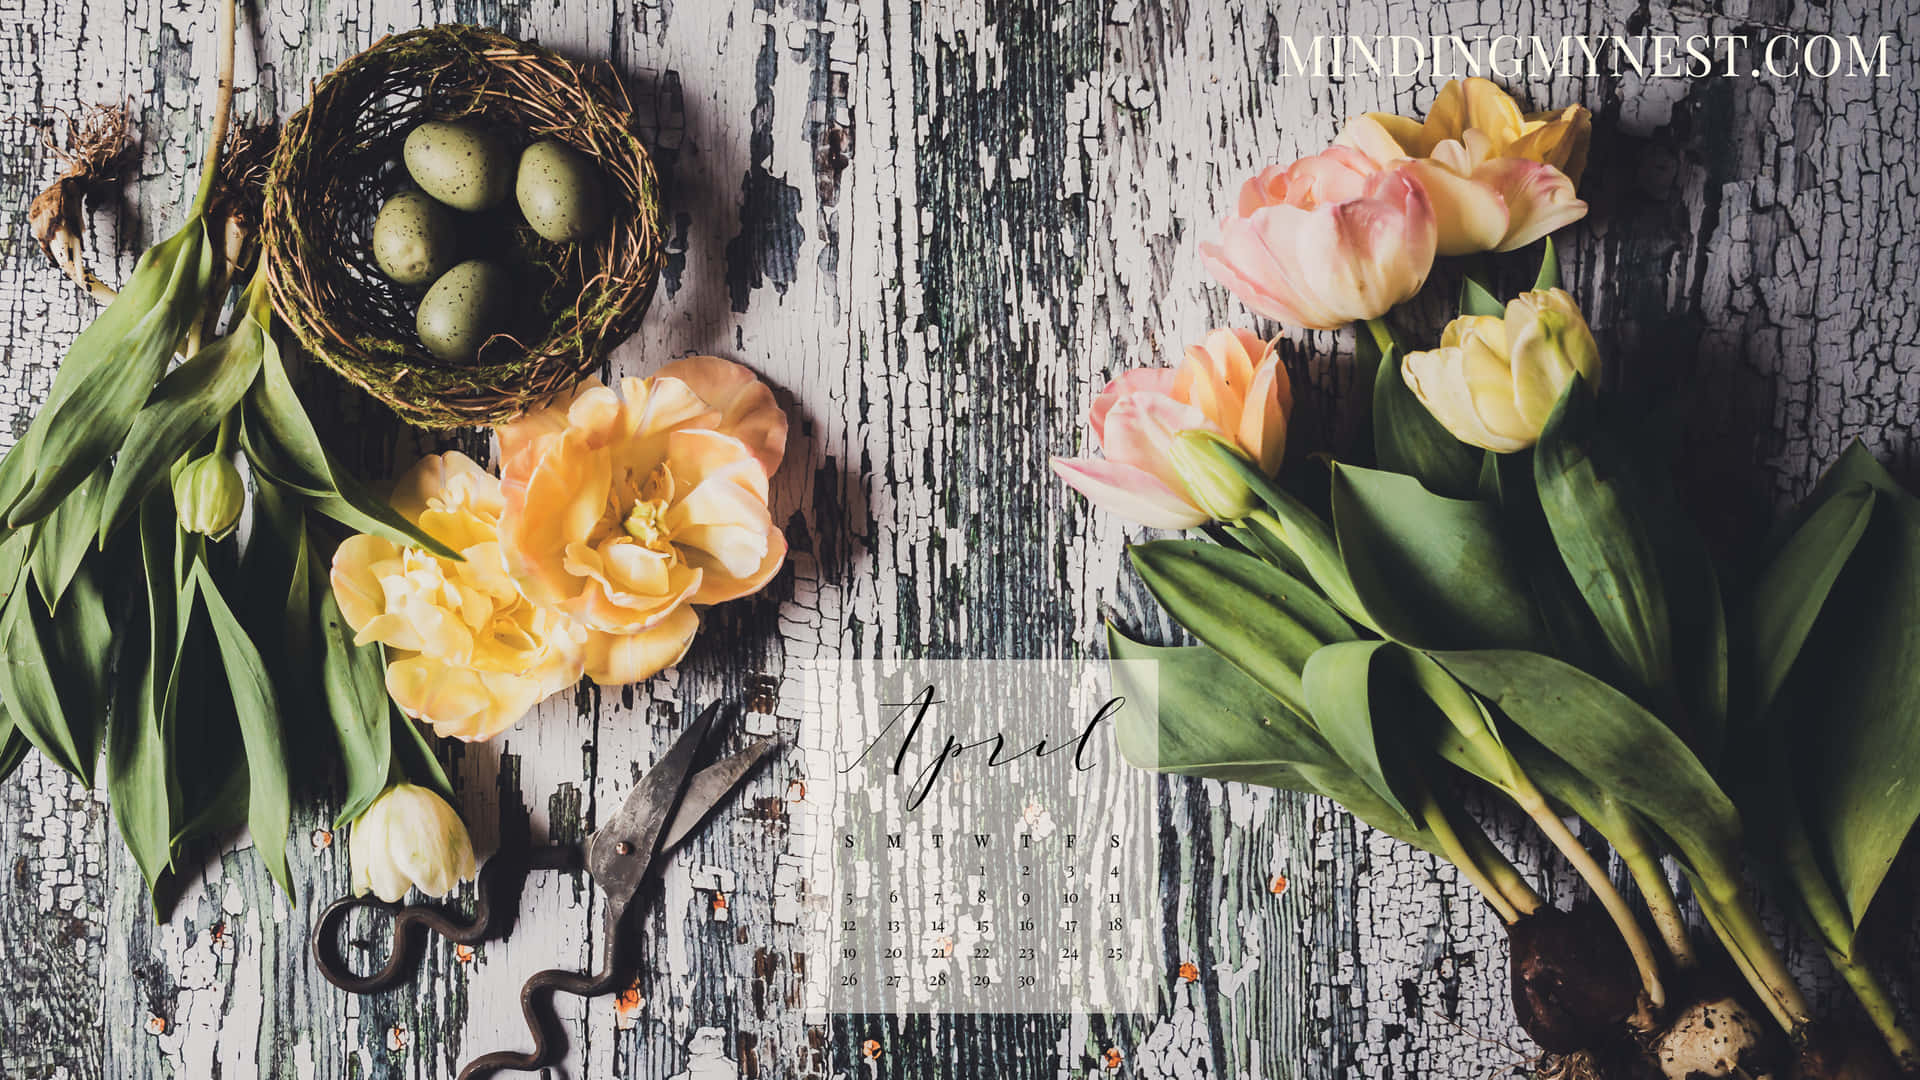 A Calendar With Tulips And Eggs On A Wooden Table Wallpaper